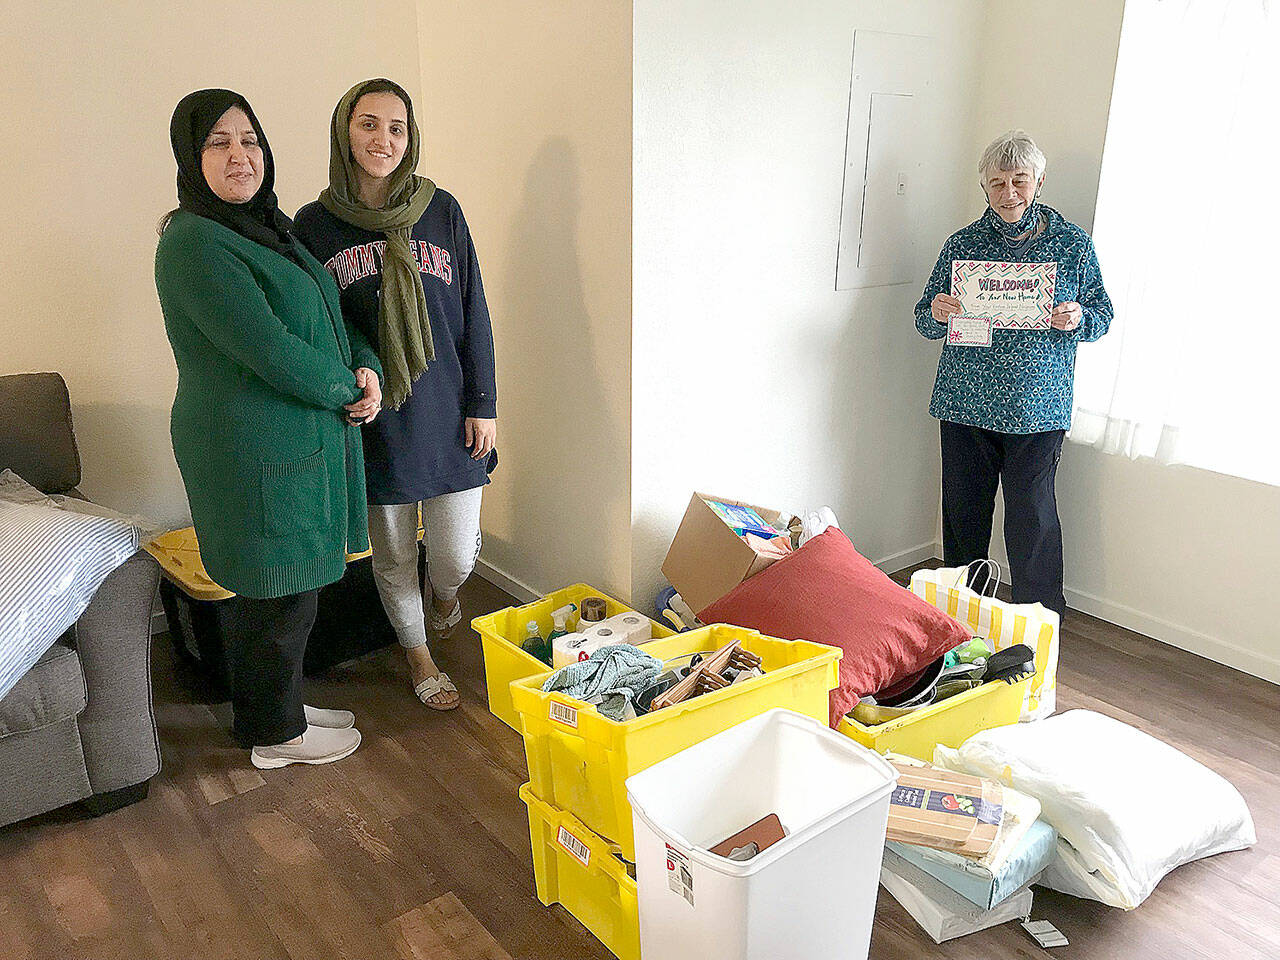 (Courtesy Photo) Earlier this year, VART delivered a household kit to the family of Nafisa Barez Saad. (Left to right) Nafisa, her teen daughter, and VART member Marian Brischle, with a welcome sign.